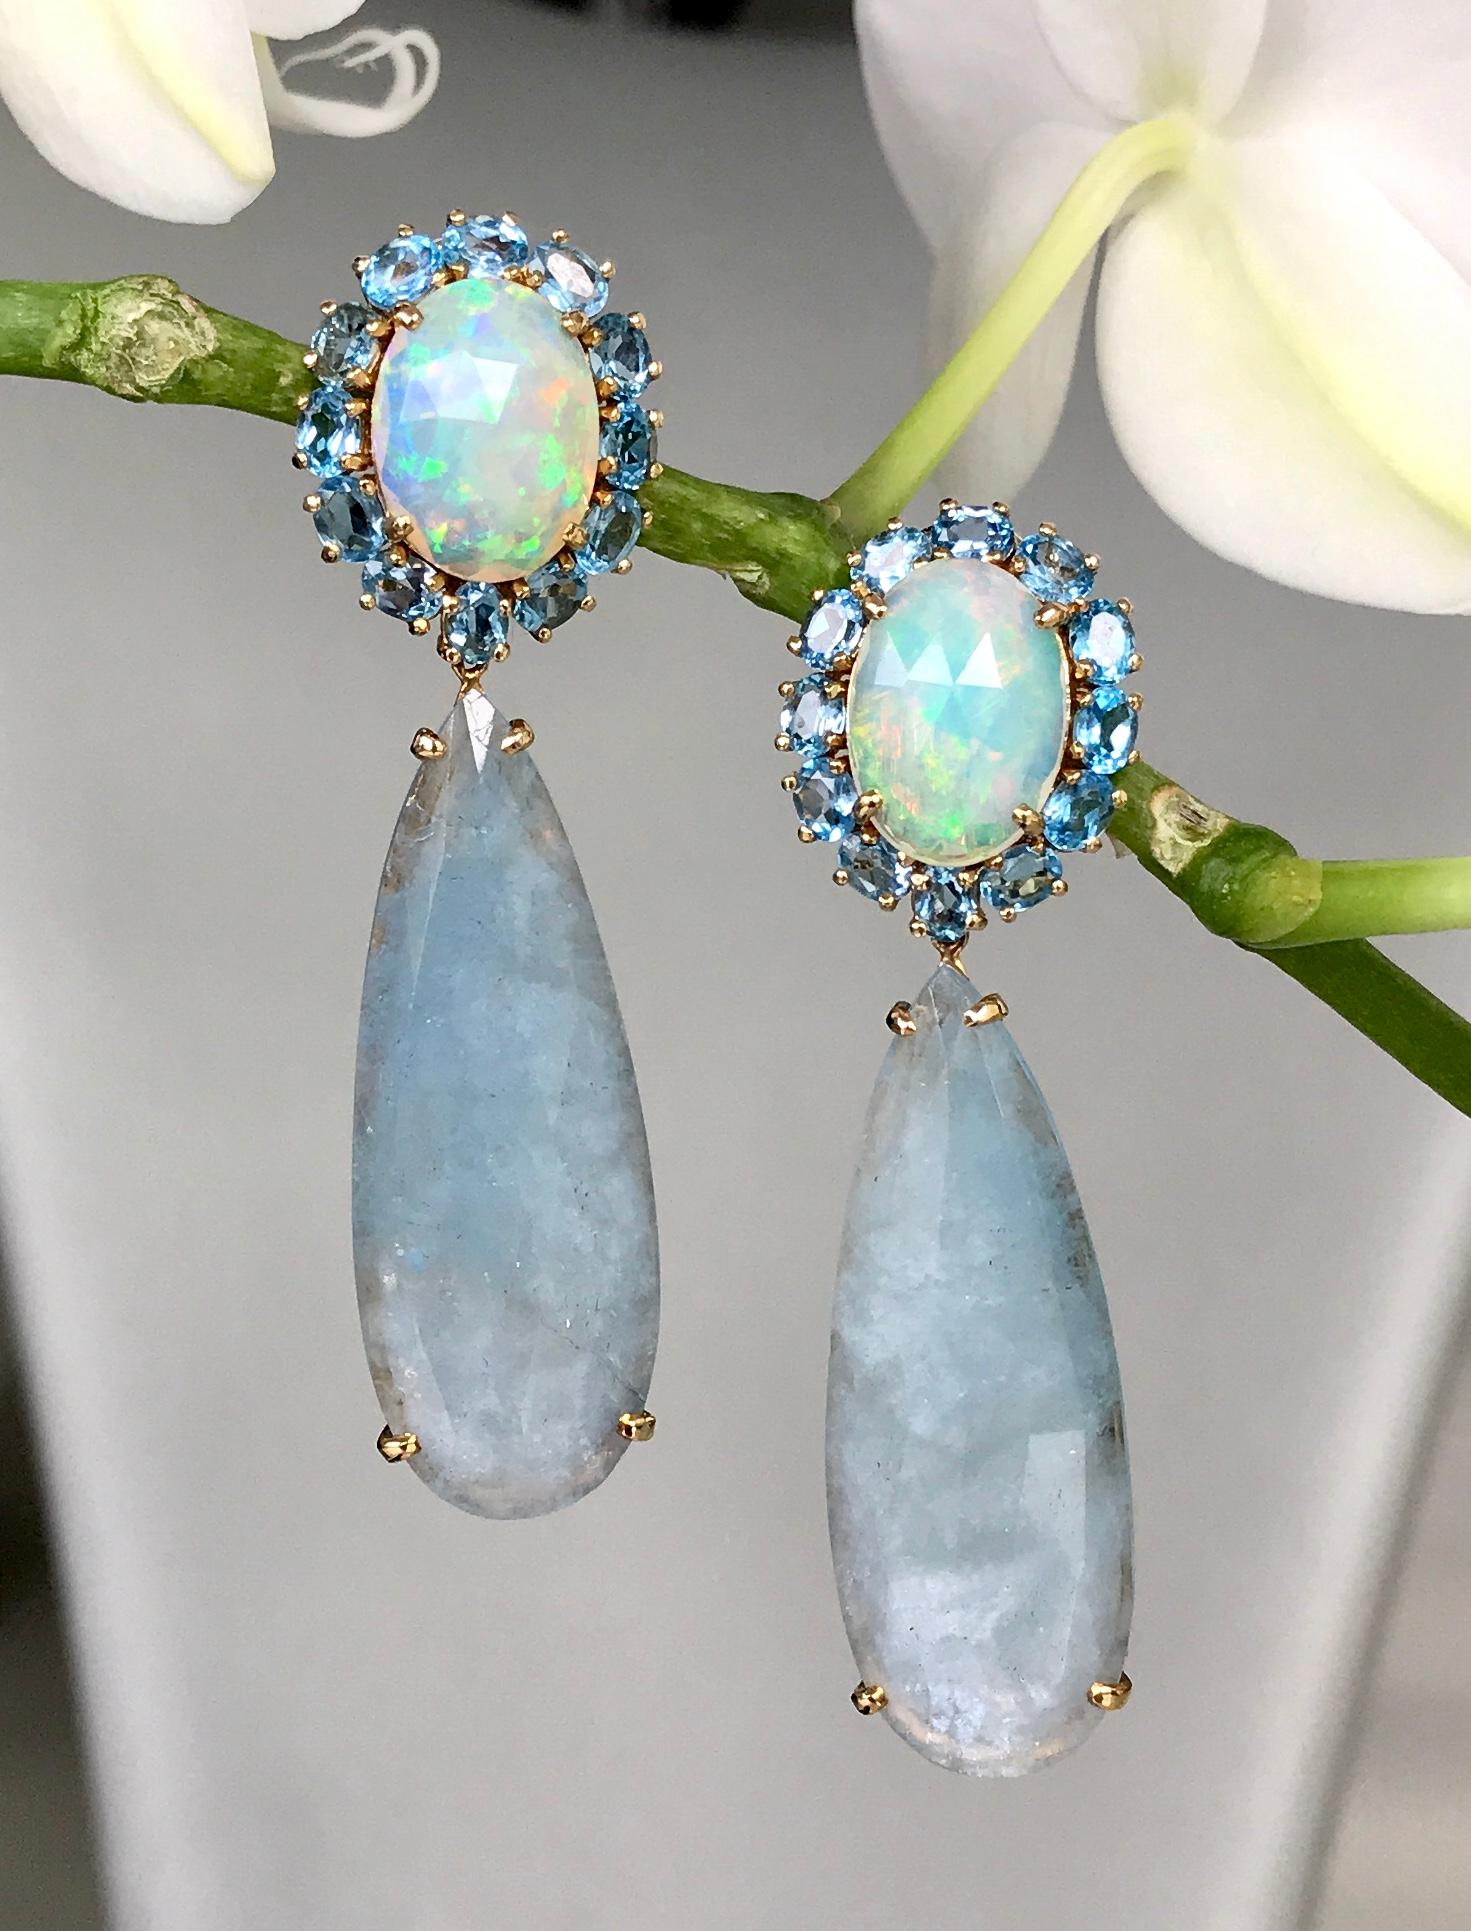 One-of-a-kind opal, aquamarine, blue topaz, and diamond drop dangle earrings, handcrafted in 18 karat yellow gold.

These exquisite iridescent opals, encircled by blue topaz and with rose cut aquamarine drops, turn any occasion into a special one.